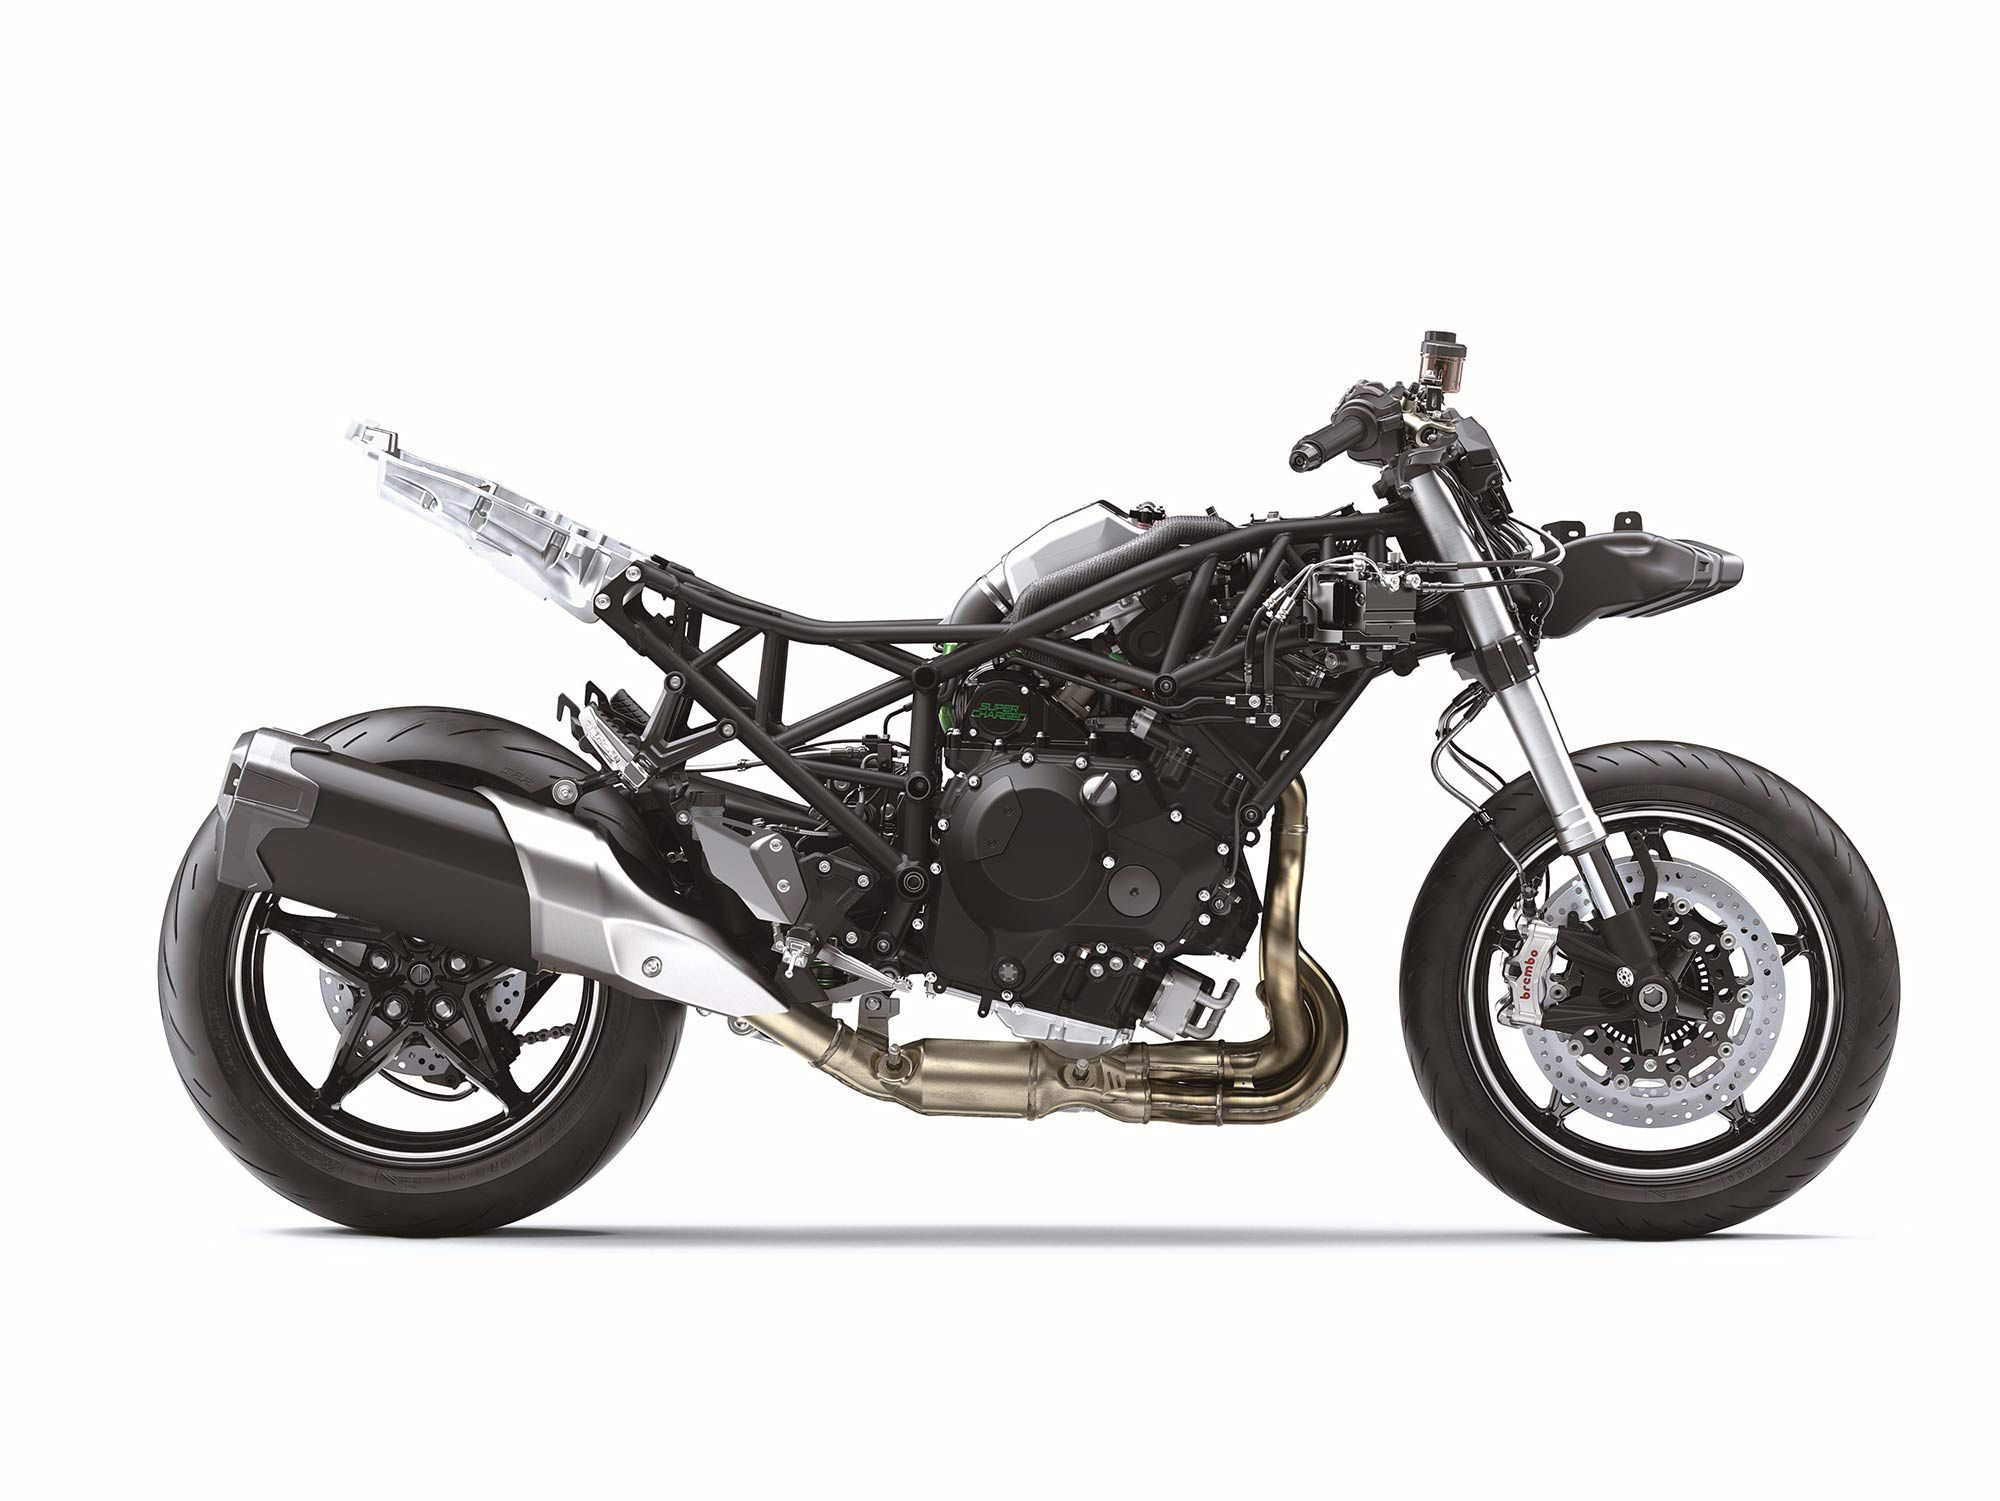 Kawasaki revised the exhaust layout as part of work to improve low- and midrange torque.